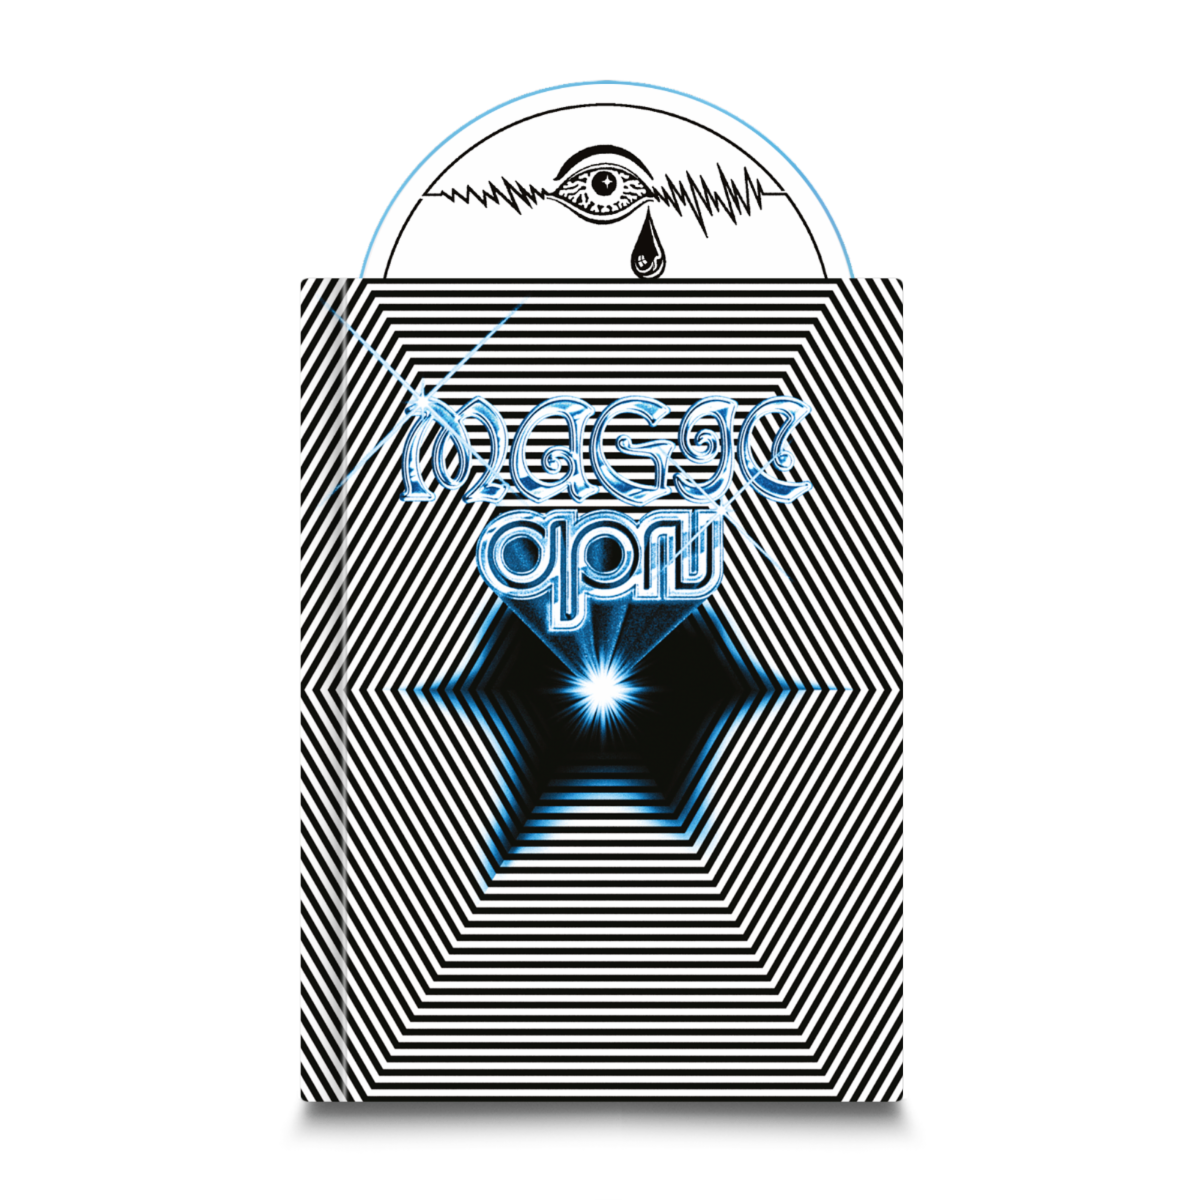 Oneohtrix Point Never’s special Magic blu-ray